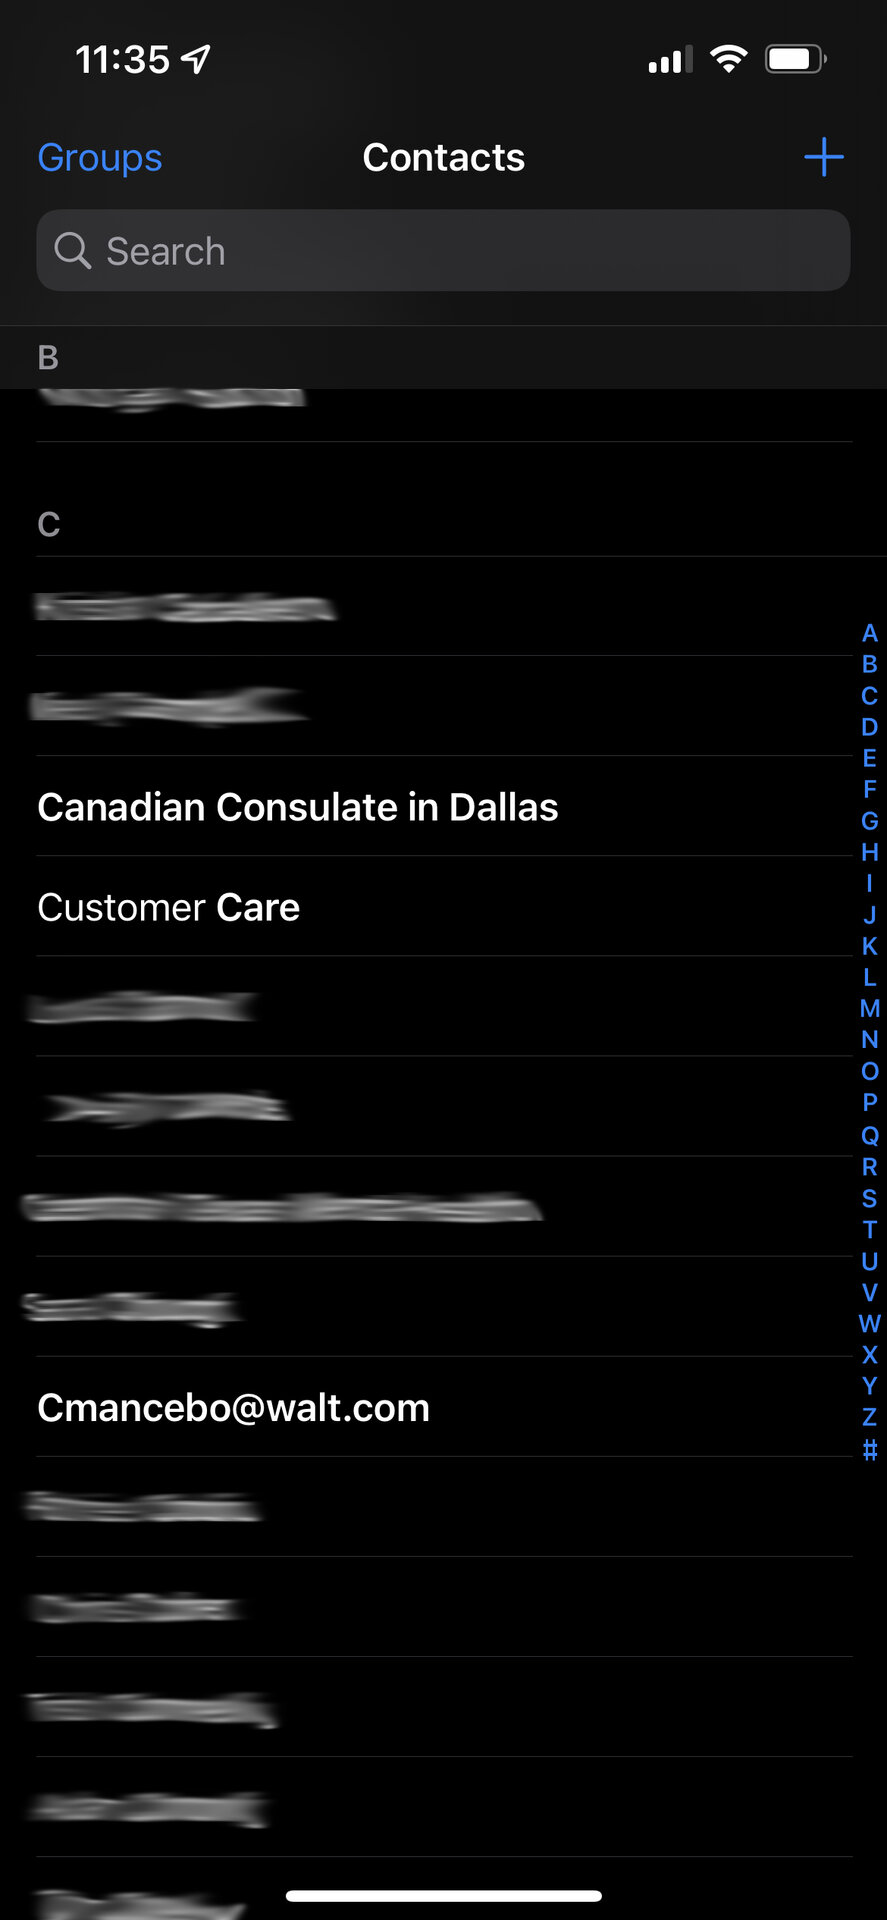 Listings in the iOS 15 Contacts app